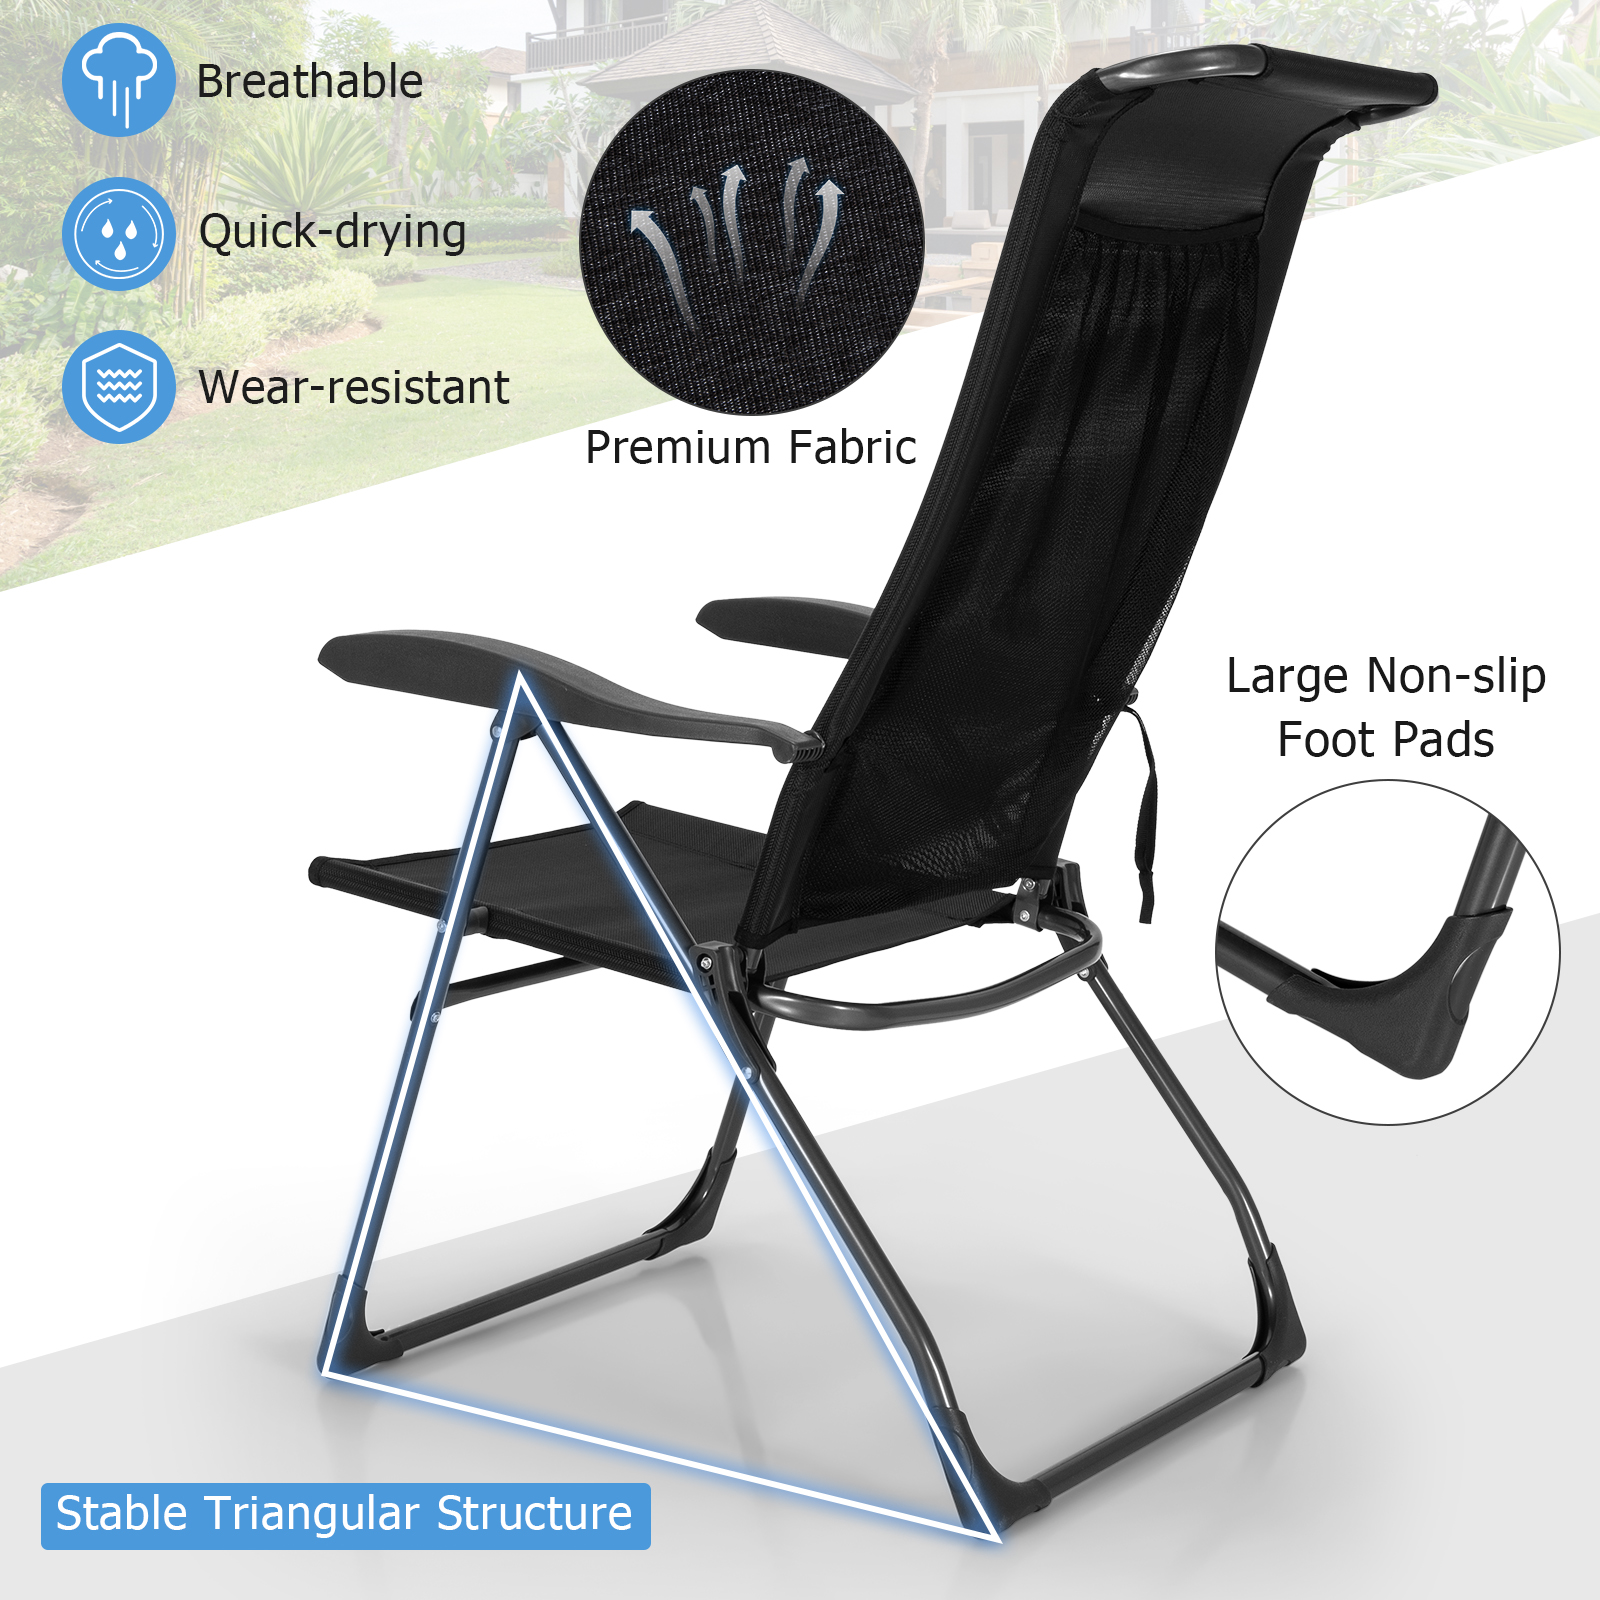 Patiojoy 4 PCS Outdoor Wicker Chaise Lounge Patio Lounge Chair Ottoman Set Camp Chairs w/7-Gear Adjustable Backrest Black - image 4 of 7